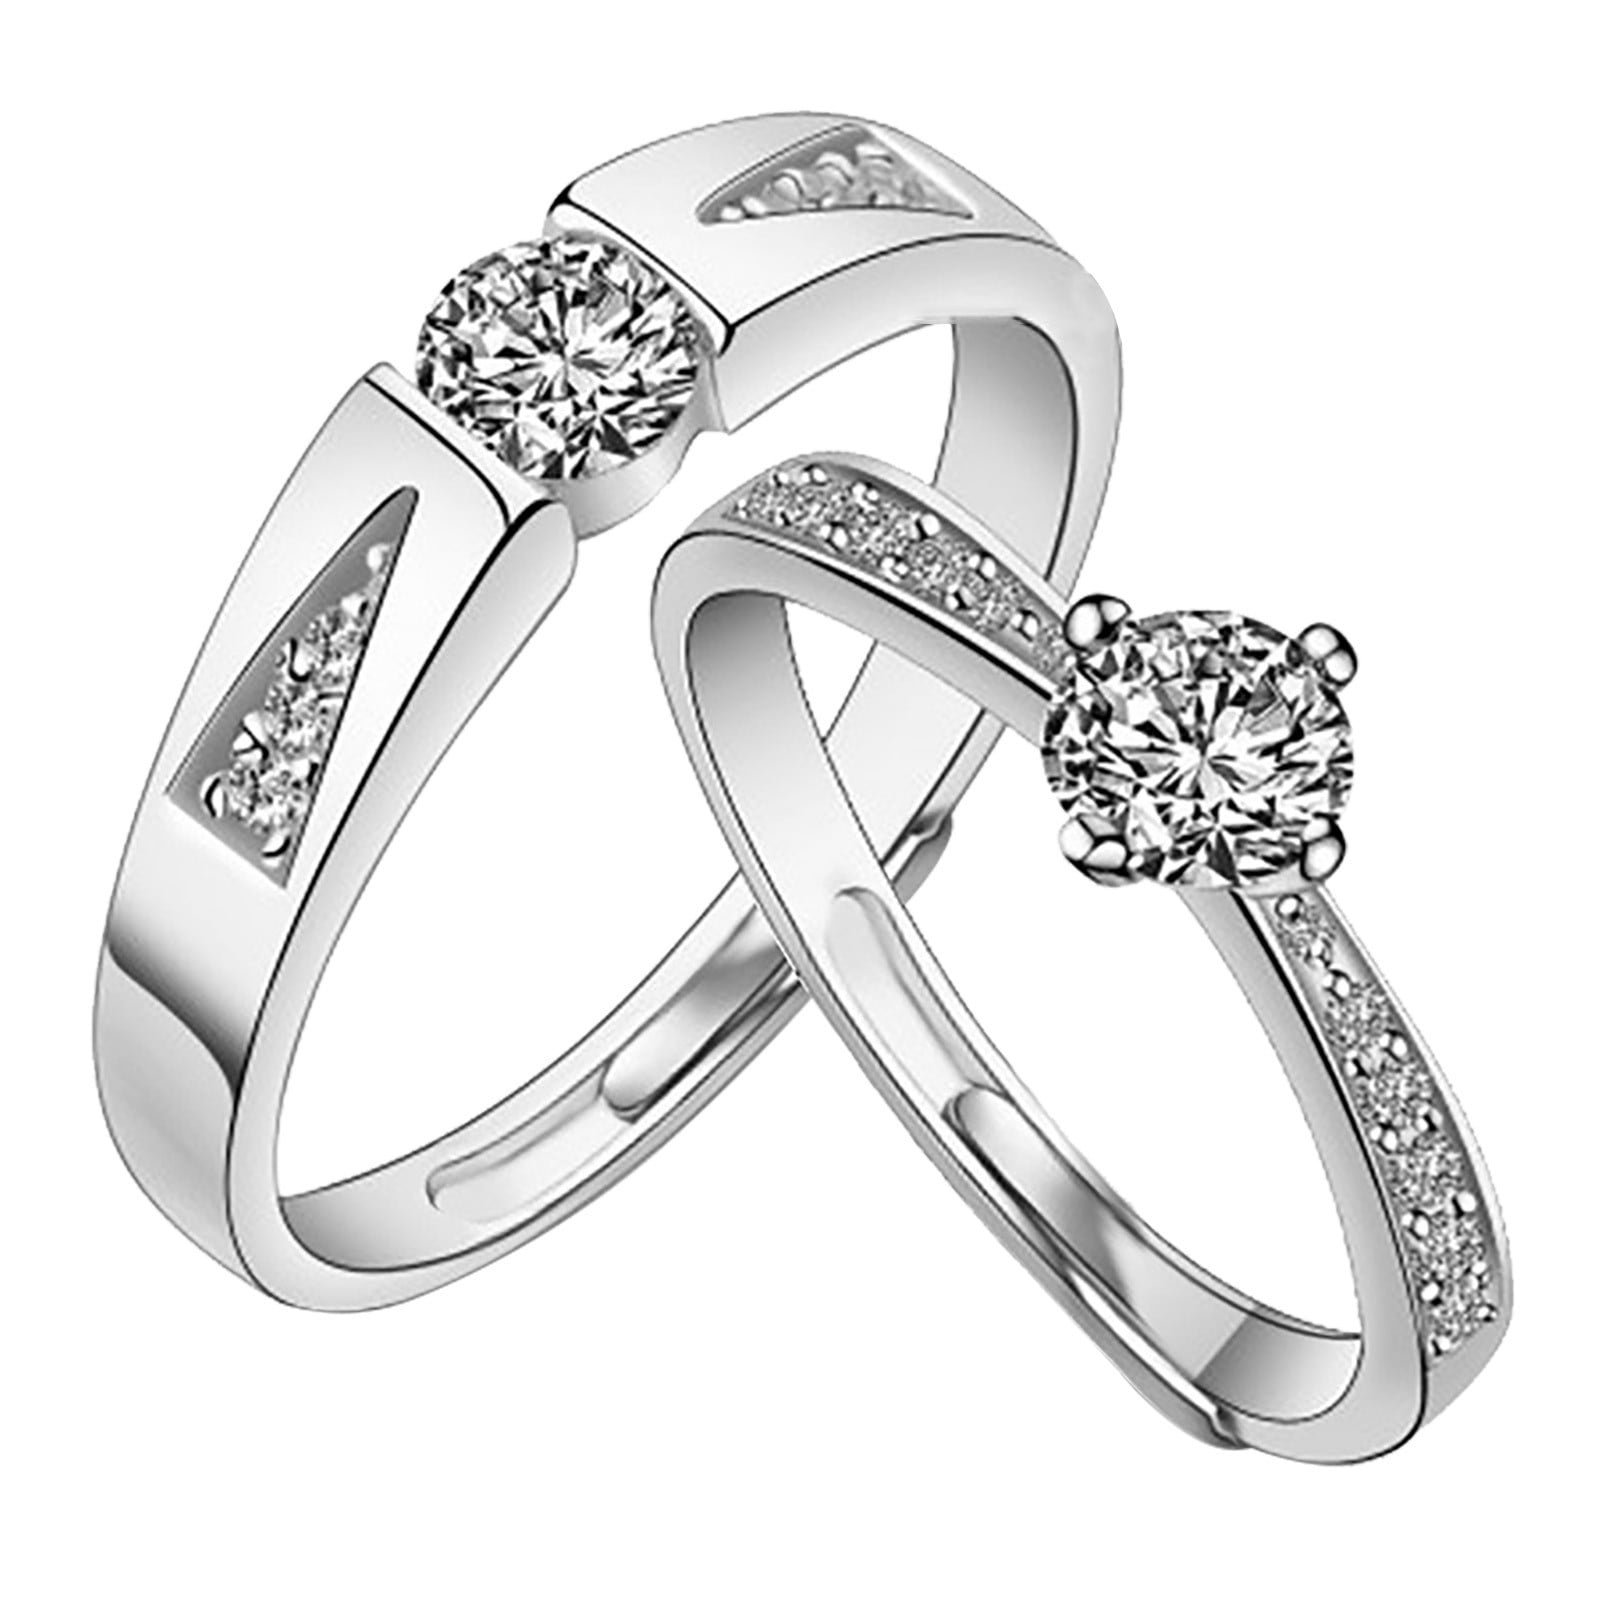 WQQZJJ Rings For Women Valentine's Day Fashion Couple Ring Jewelry Men's  Steel Titaium Ring Women Gemstone Rings Jewelry Clearance on Deals -  Walmart.com